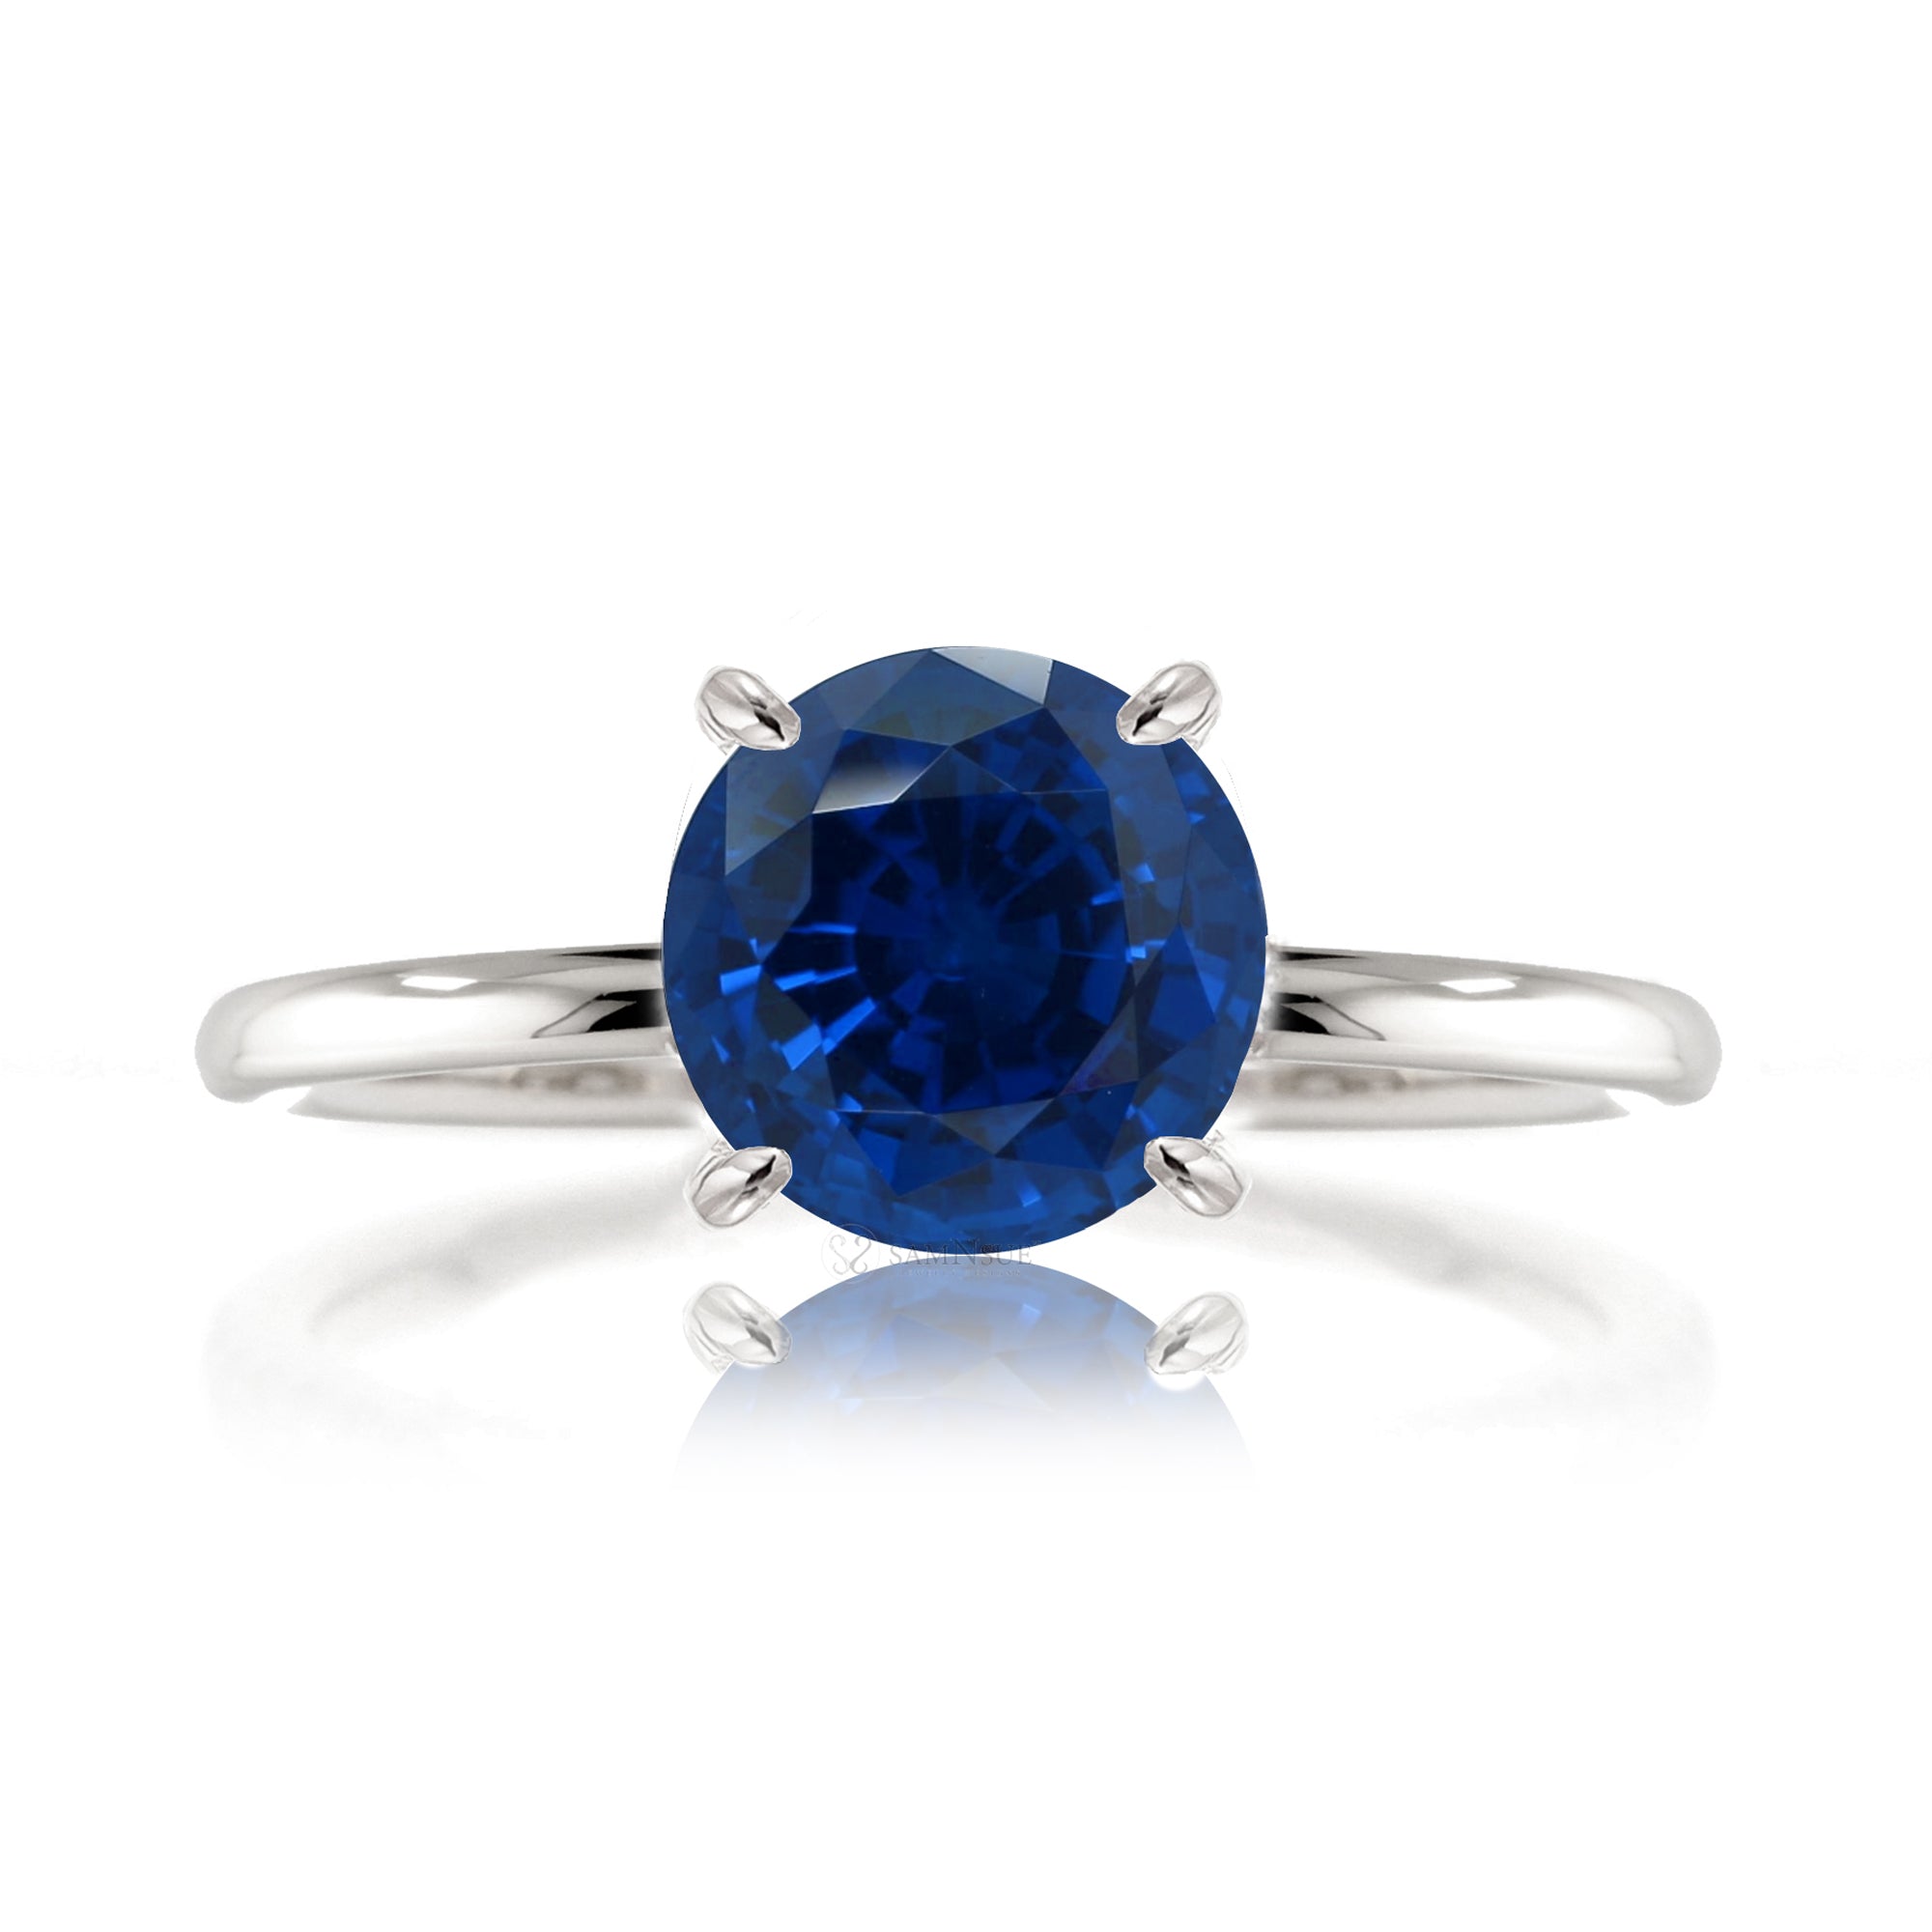 Round blue sapphire solid band engagement ring white gold - the Ava